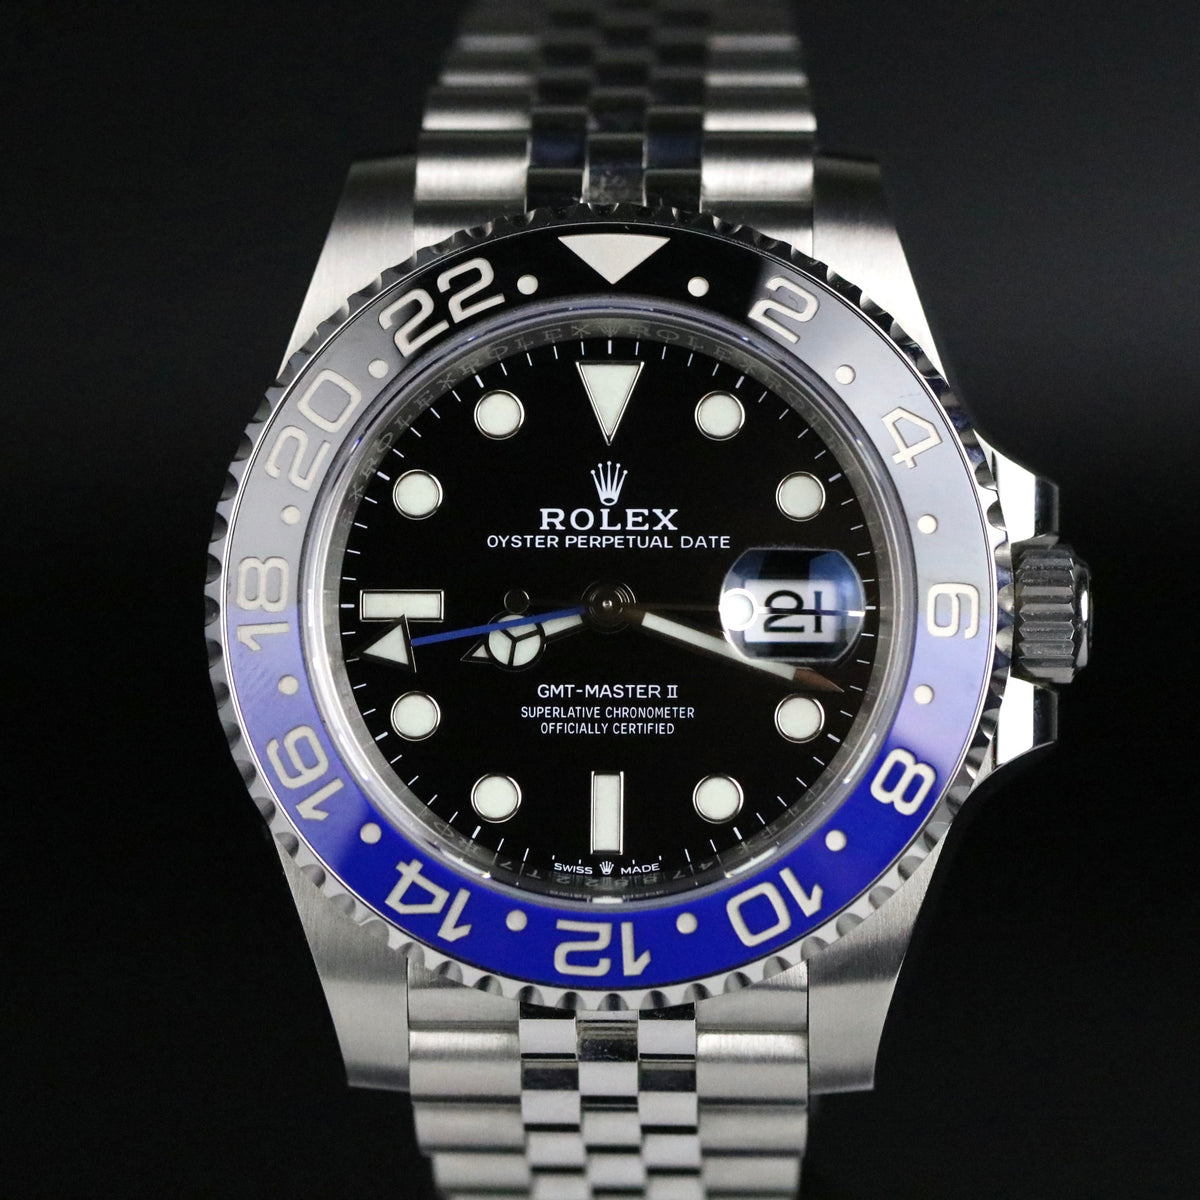 2020 Rolex 126710BLNR GMT-MASTER II Batgirl with Box & Papers